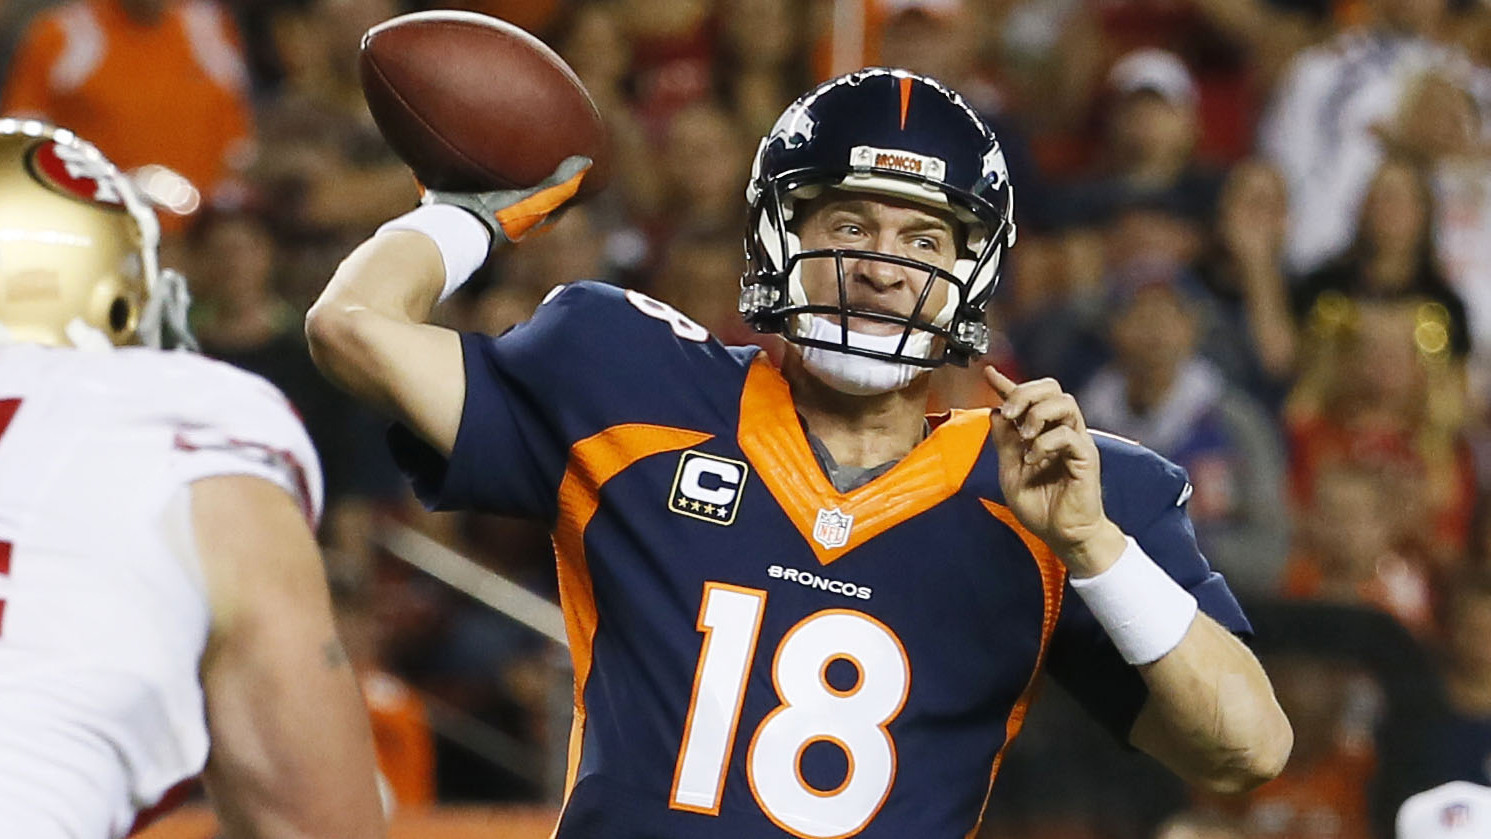 Peyton Manning breaks NFL record with 509th touchdown pass - LA Times1491 x 839